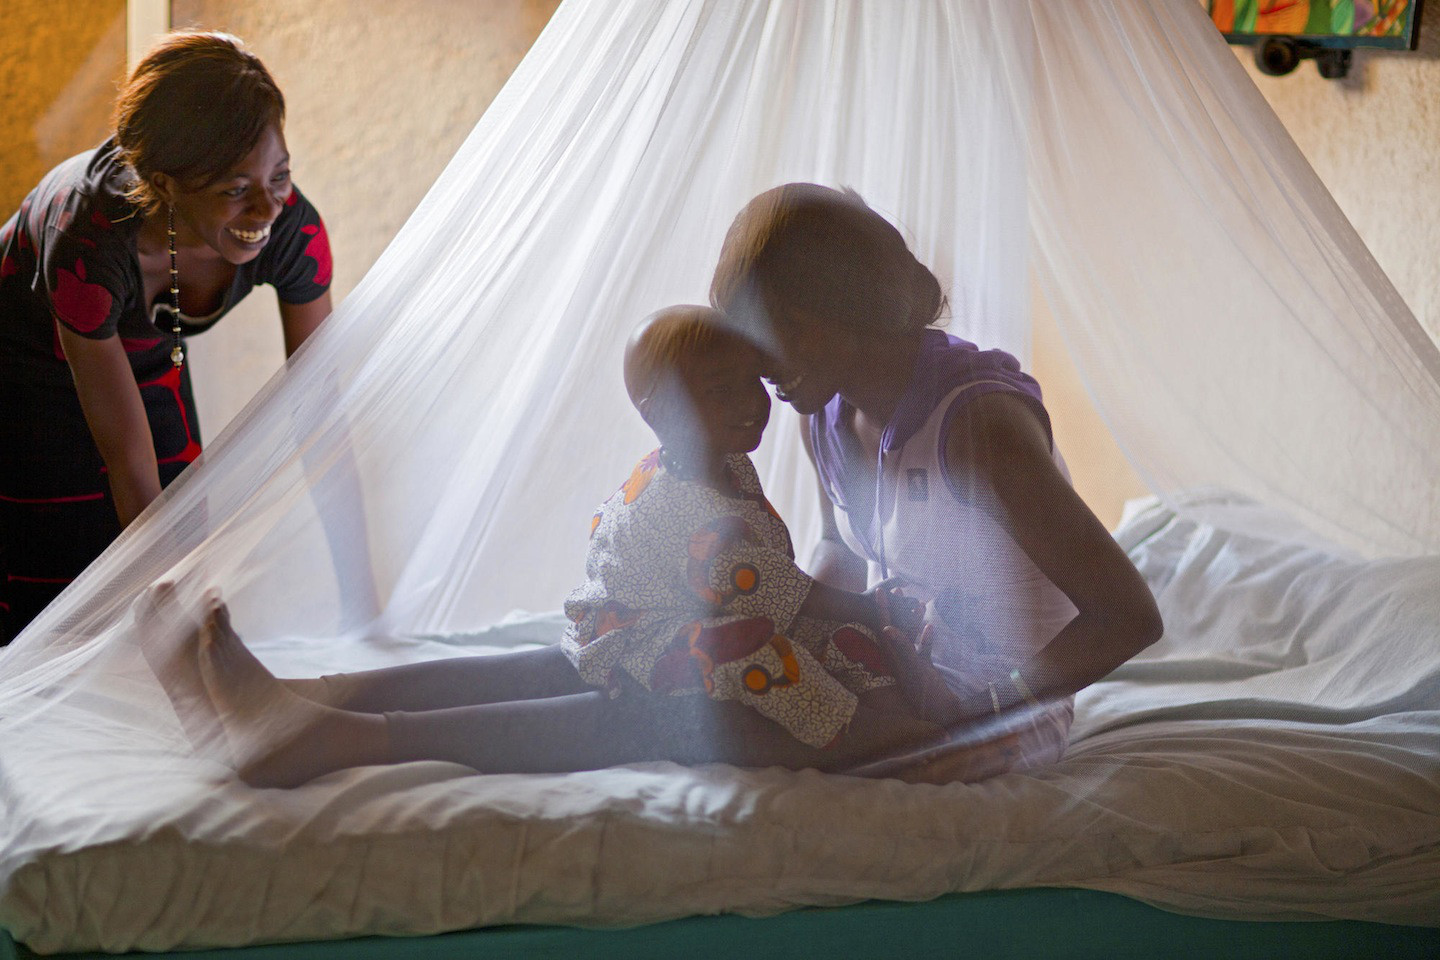 A mother and child wake up under a mosquito net.